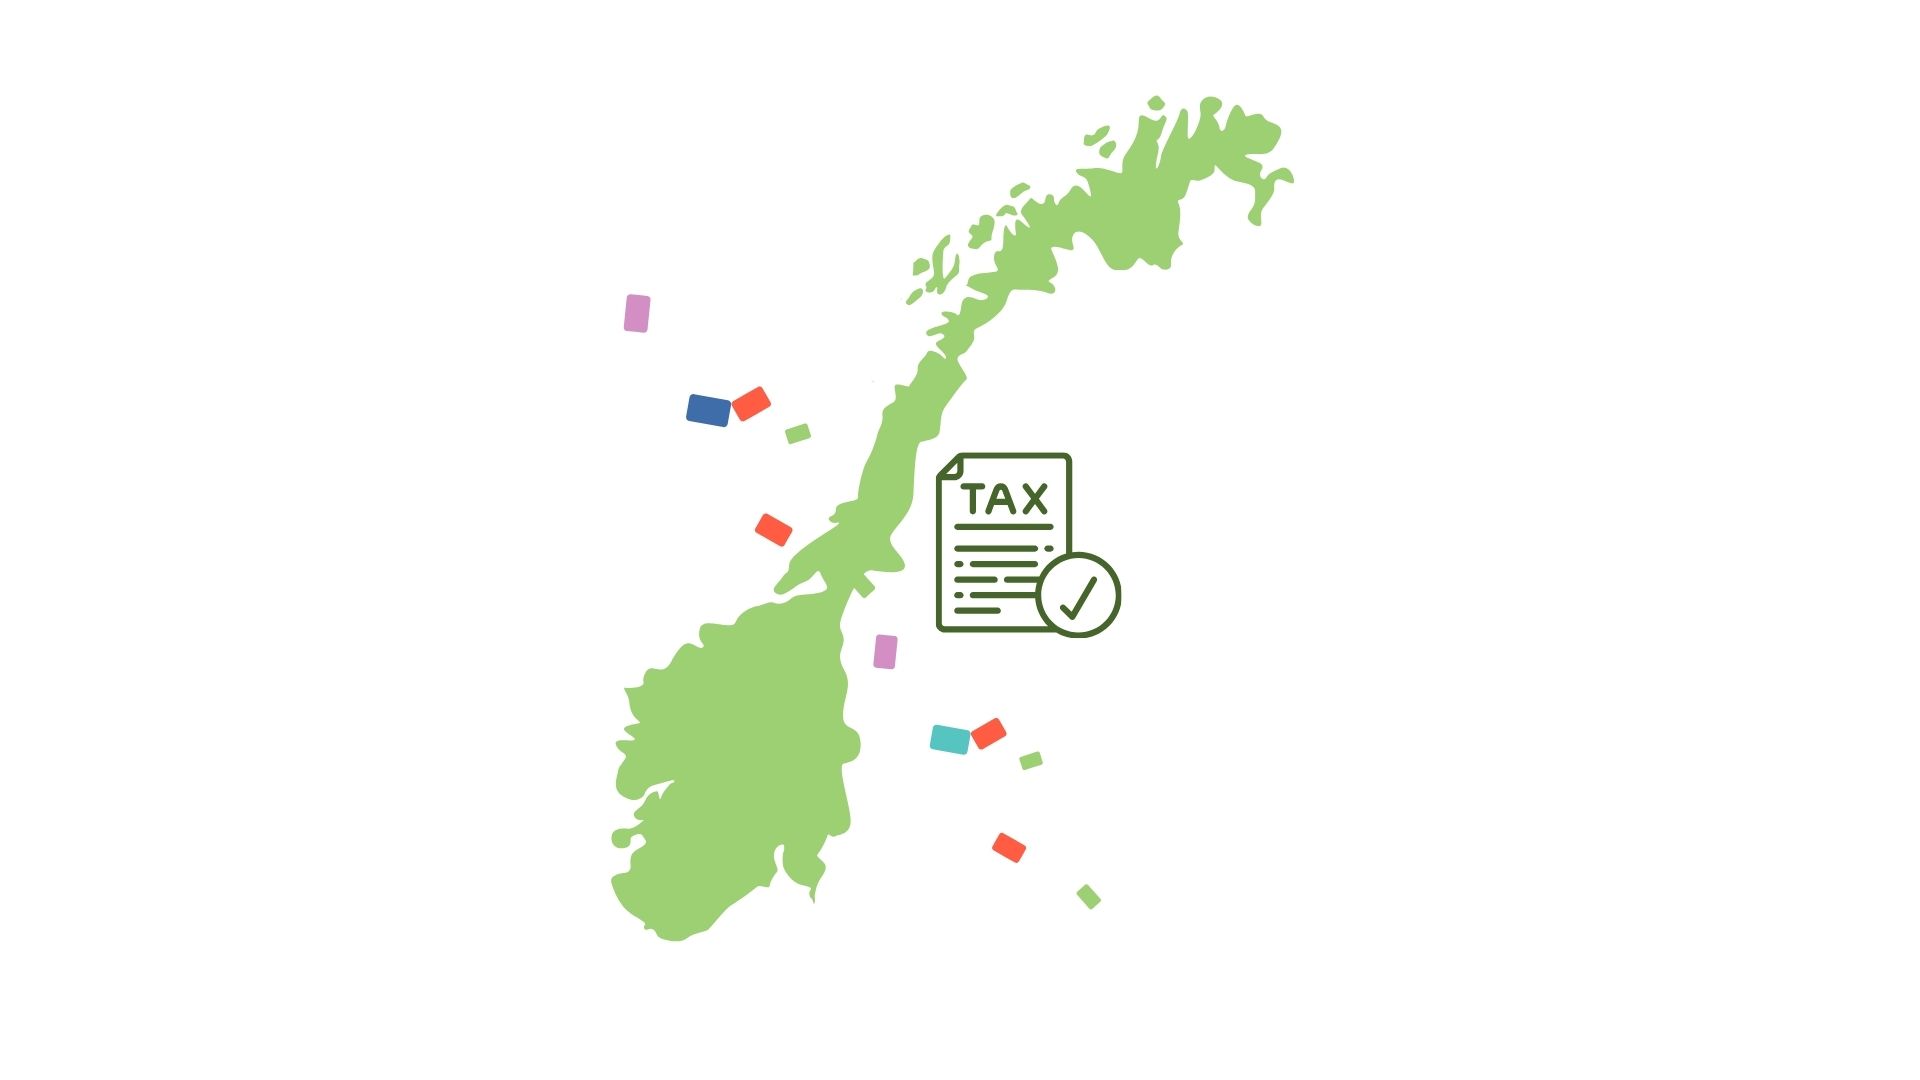 Gift card tax in Norway